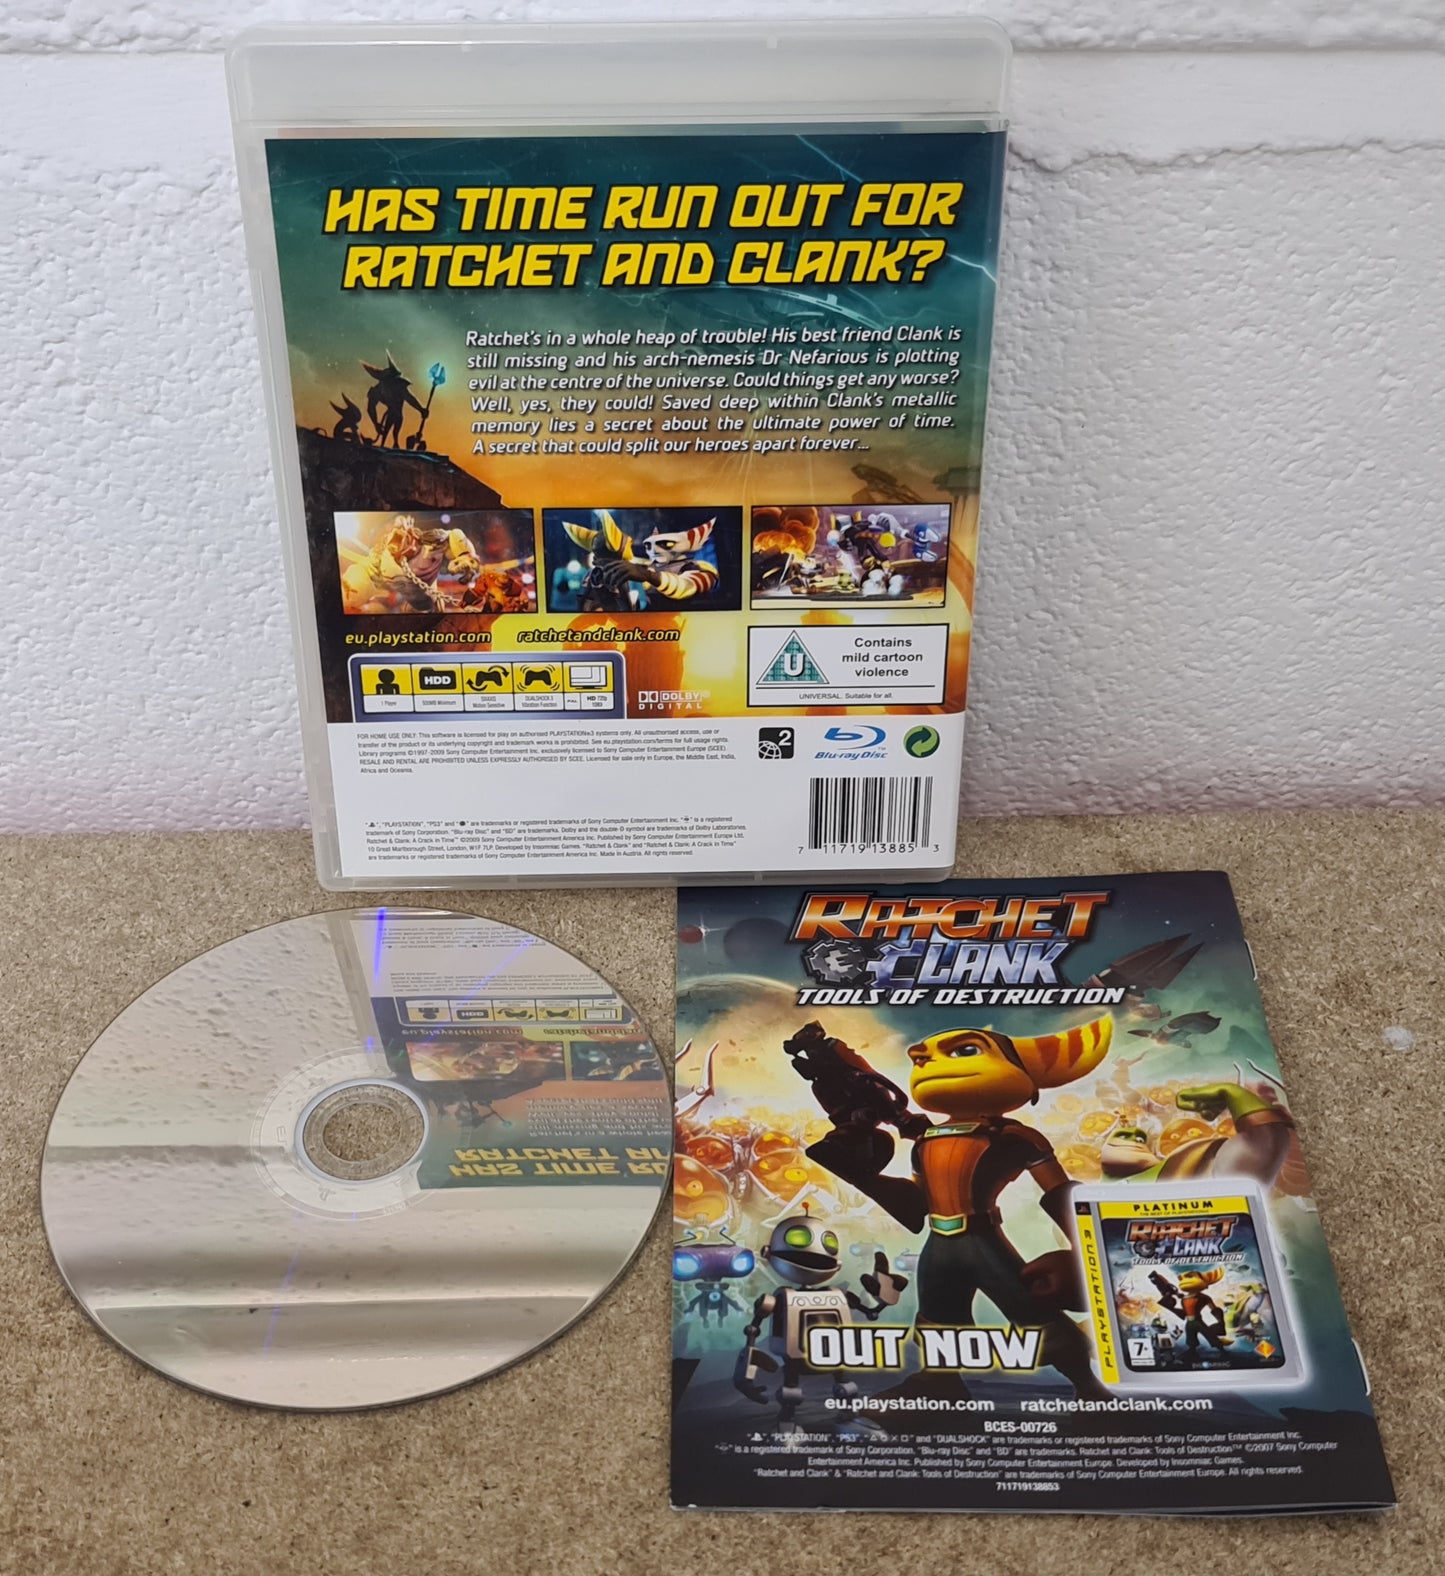 Ratchet & Clank: A Crack in Time PS3 (Sony Playstation 3) Game